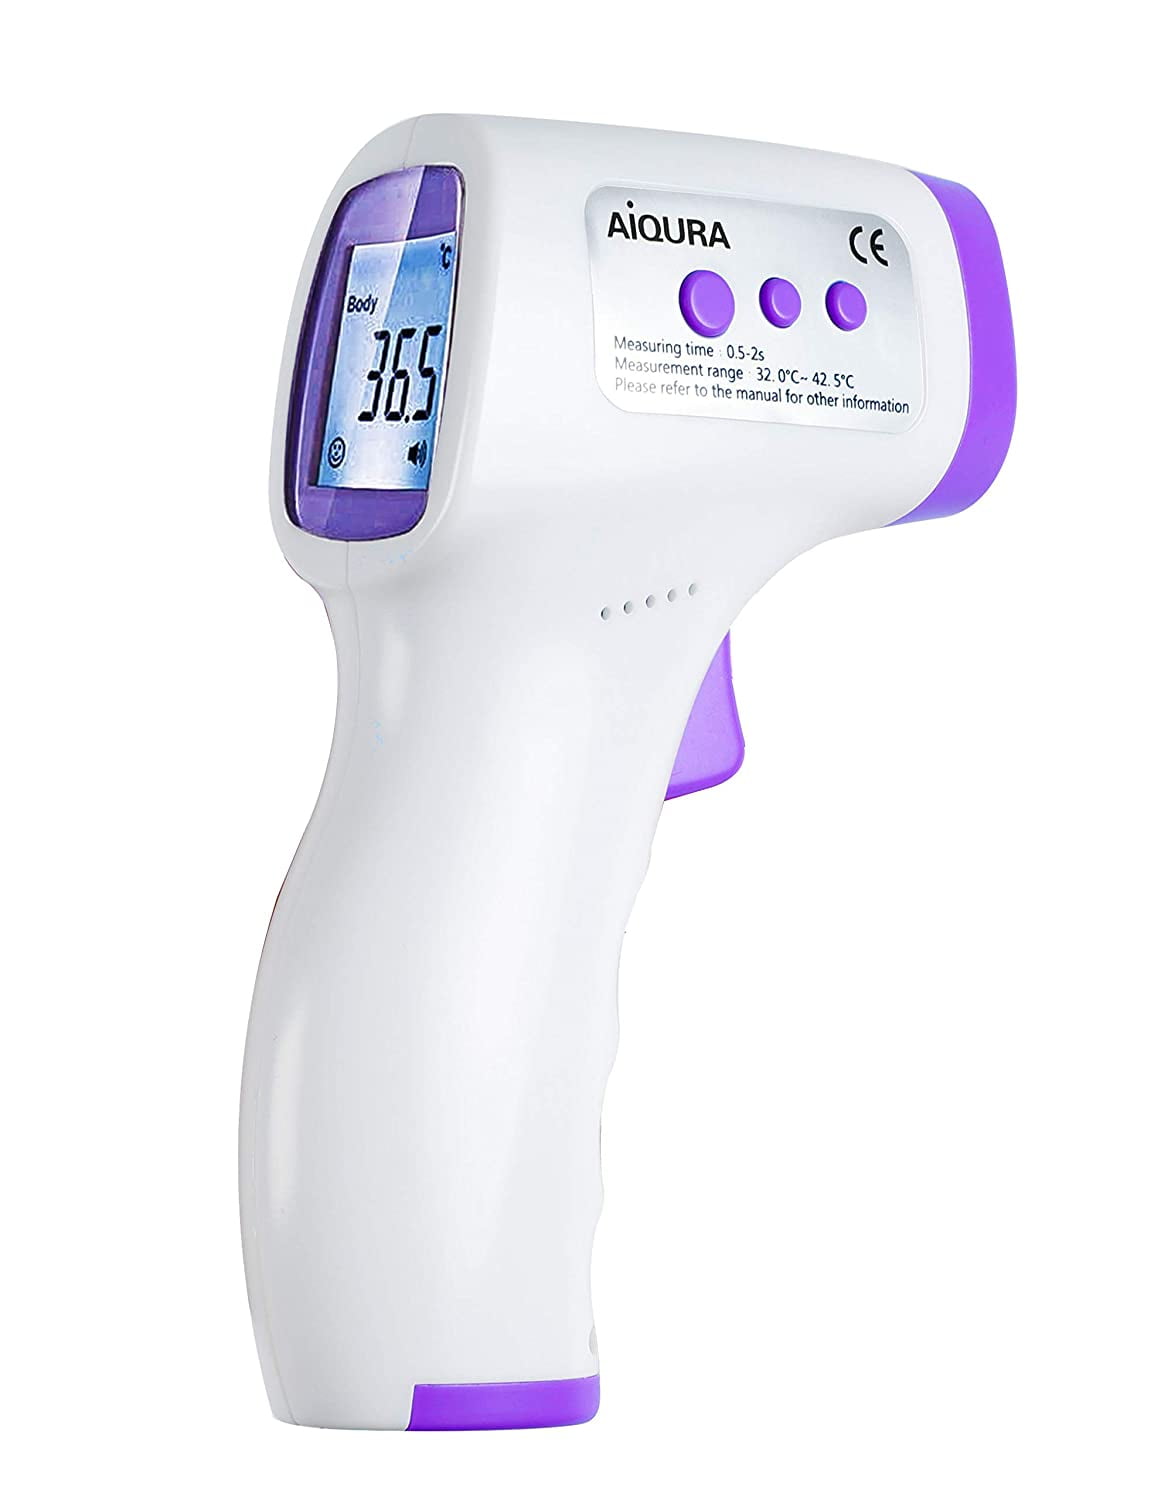 Baby Digital IR Infrared Body Thermometer Non-Contact Laser Temperature Gun Sale 